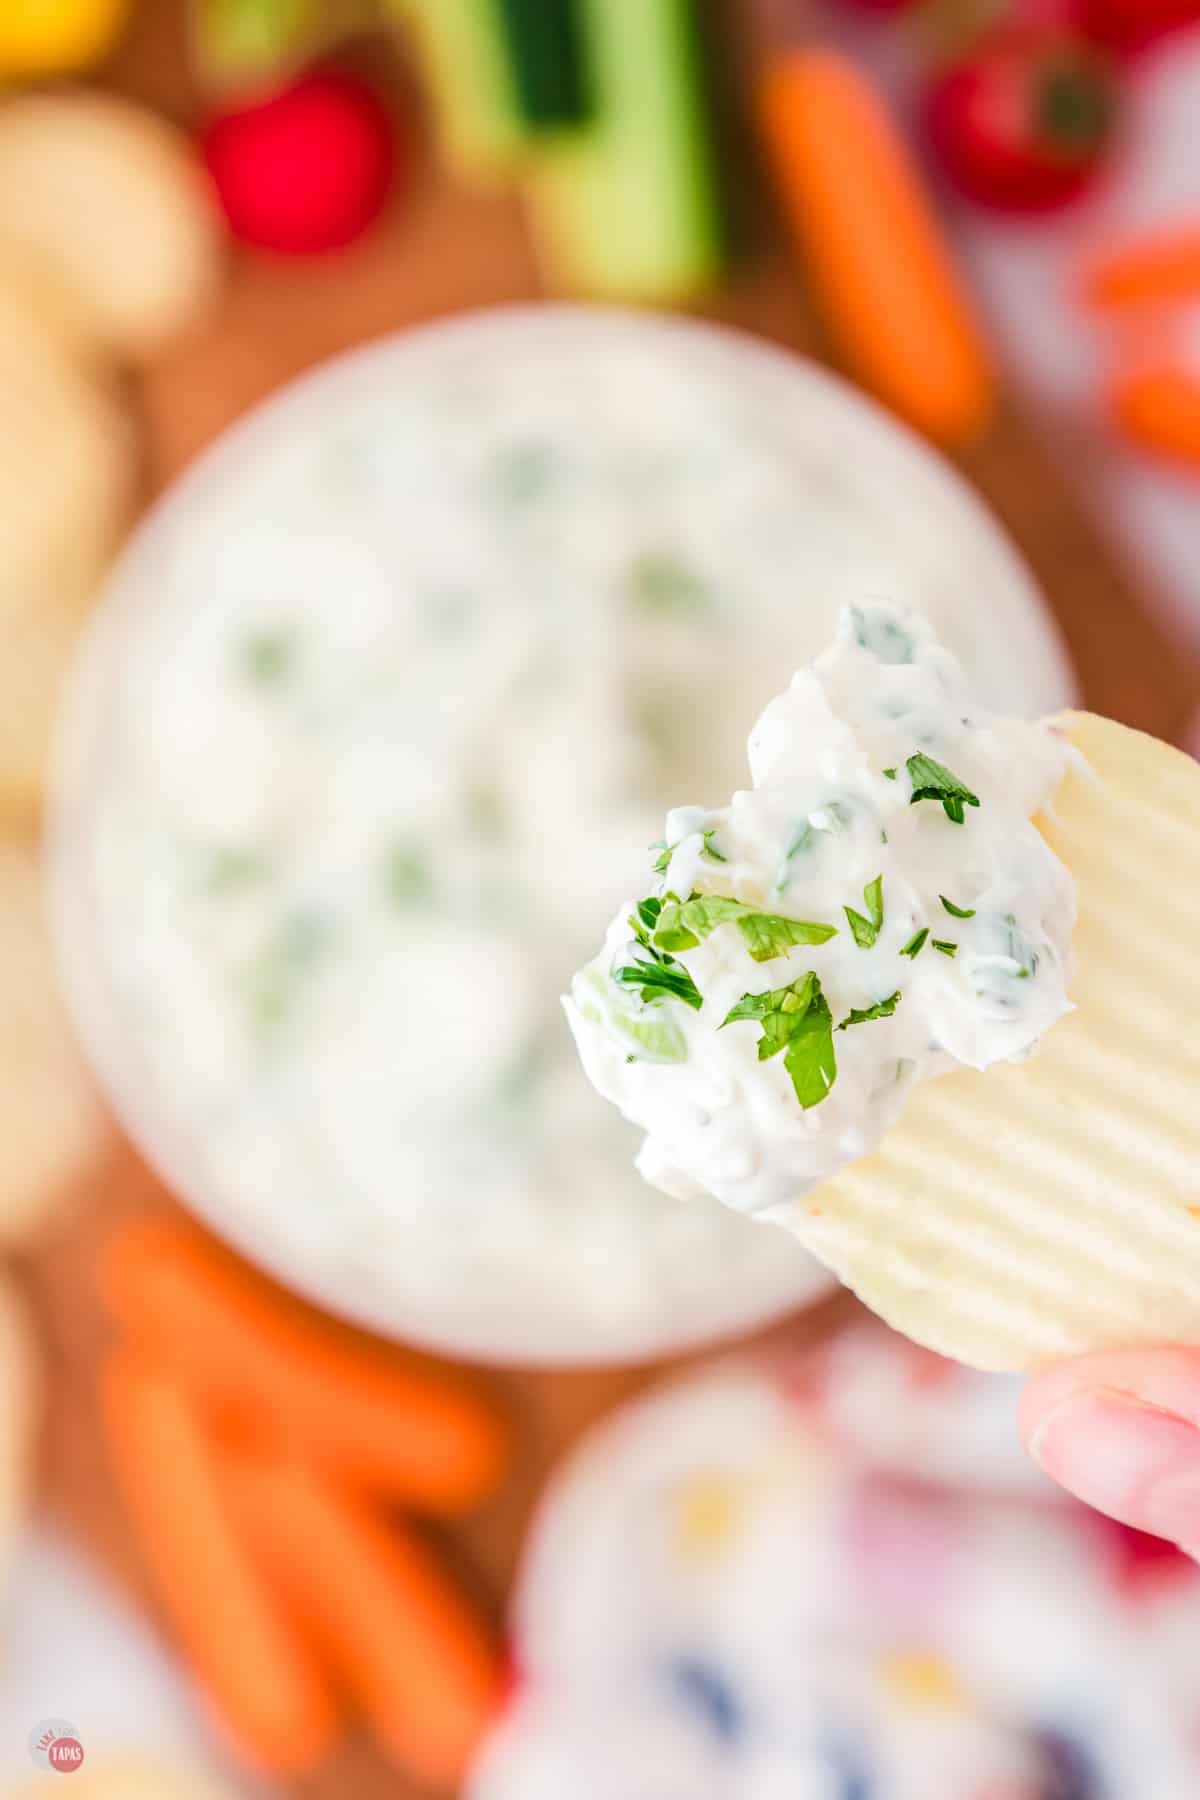 Top view of a small white bowl blurred in the background on a worktop filled with green onion dip garnished with parsley with a chip in focus being lifted in mid-air that has some dip on it.